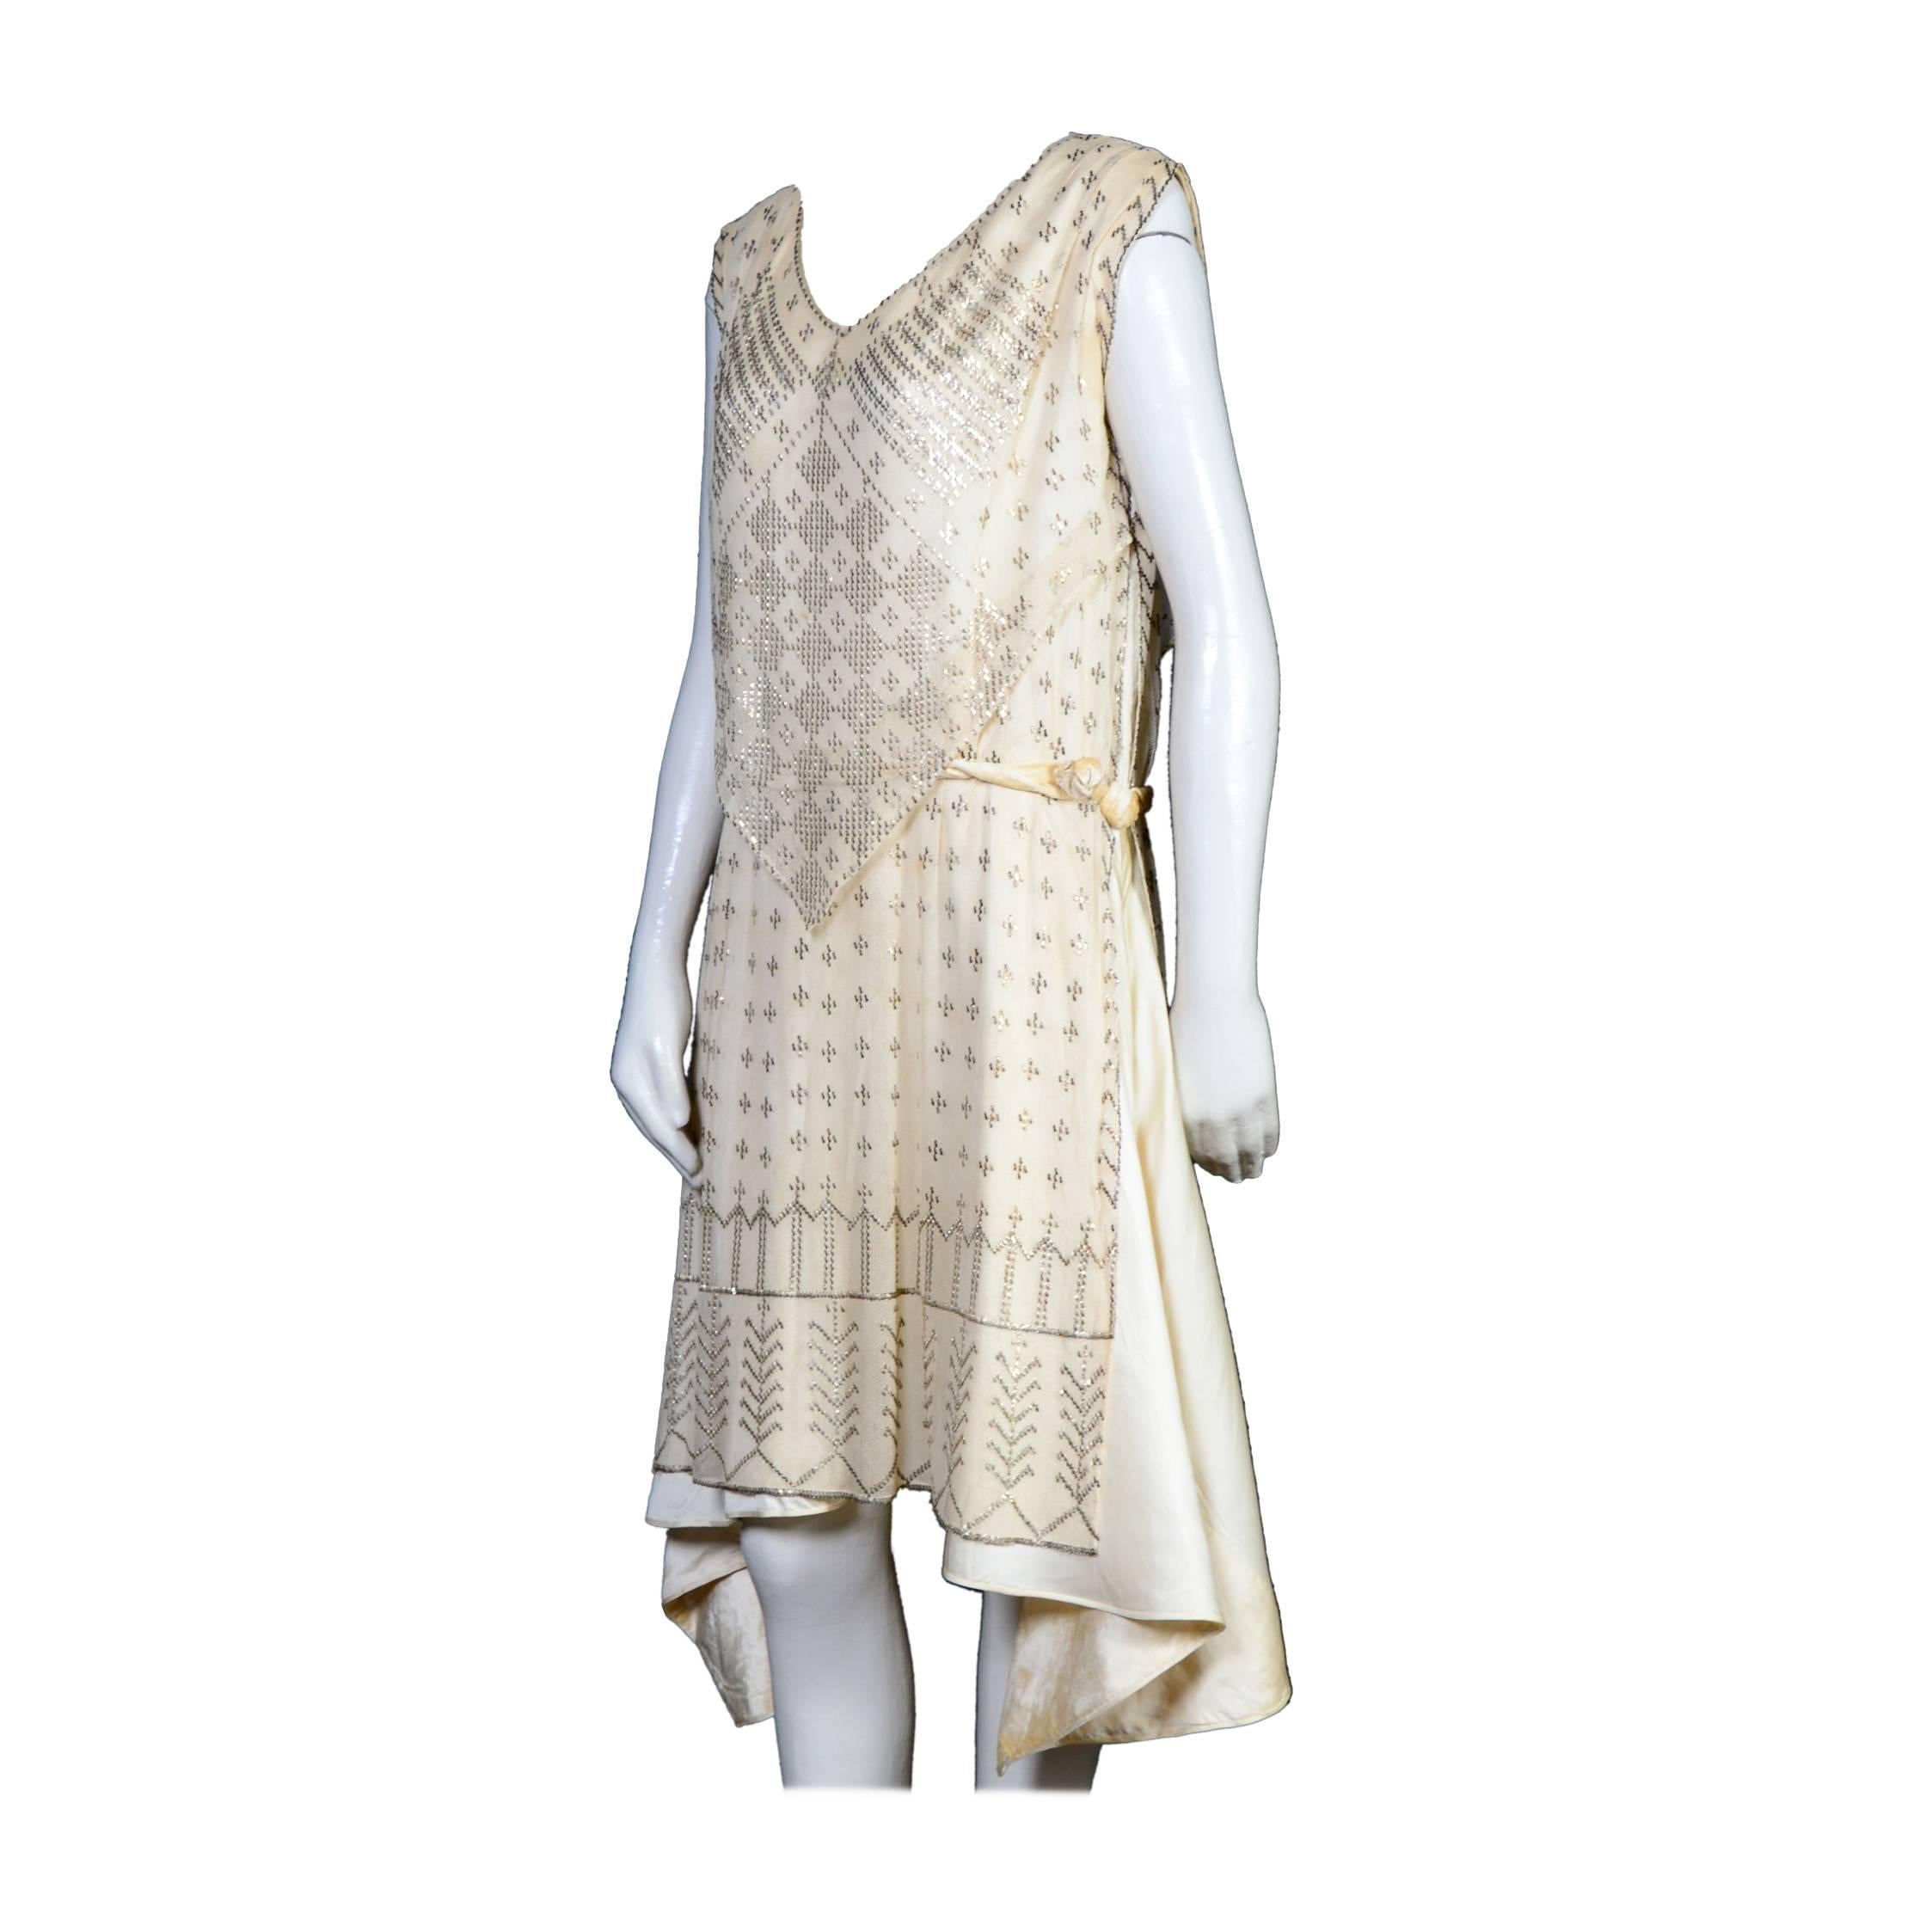 Authentic 1920's Art Deco Era Assuit dress, a rare example in cream cotton netting mesh with hand-applied spangles. Under layer soi sauvage and velvet. Although there are no tags, I am quite sure that this would have originally had the 